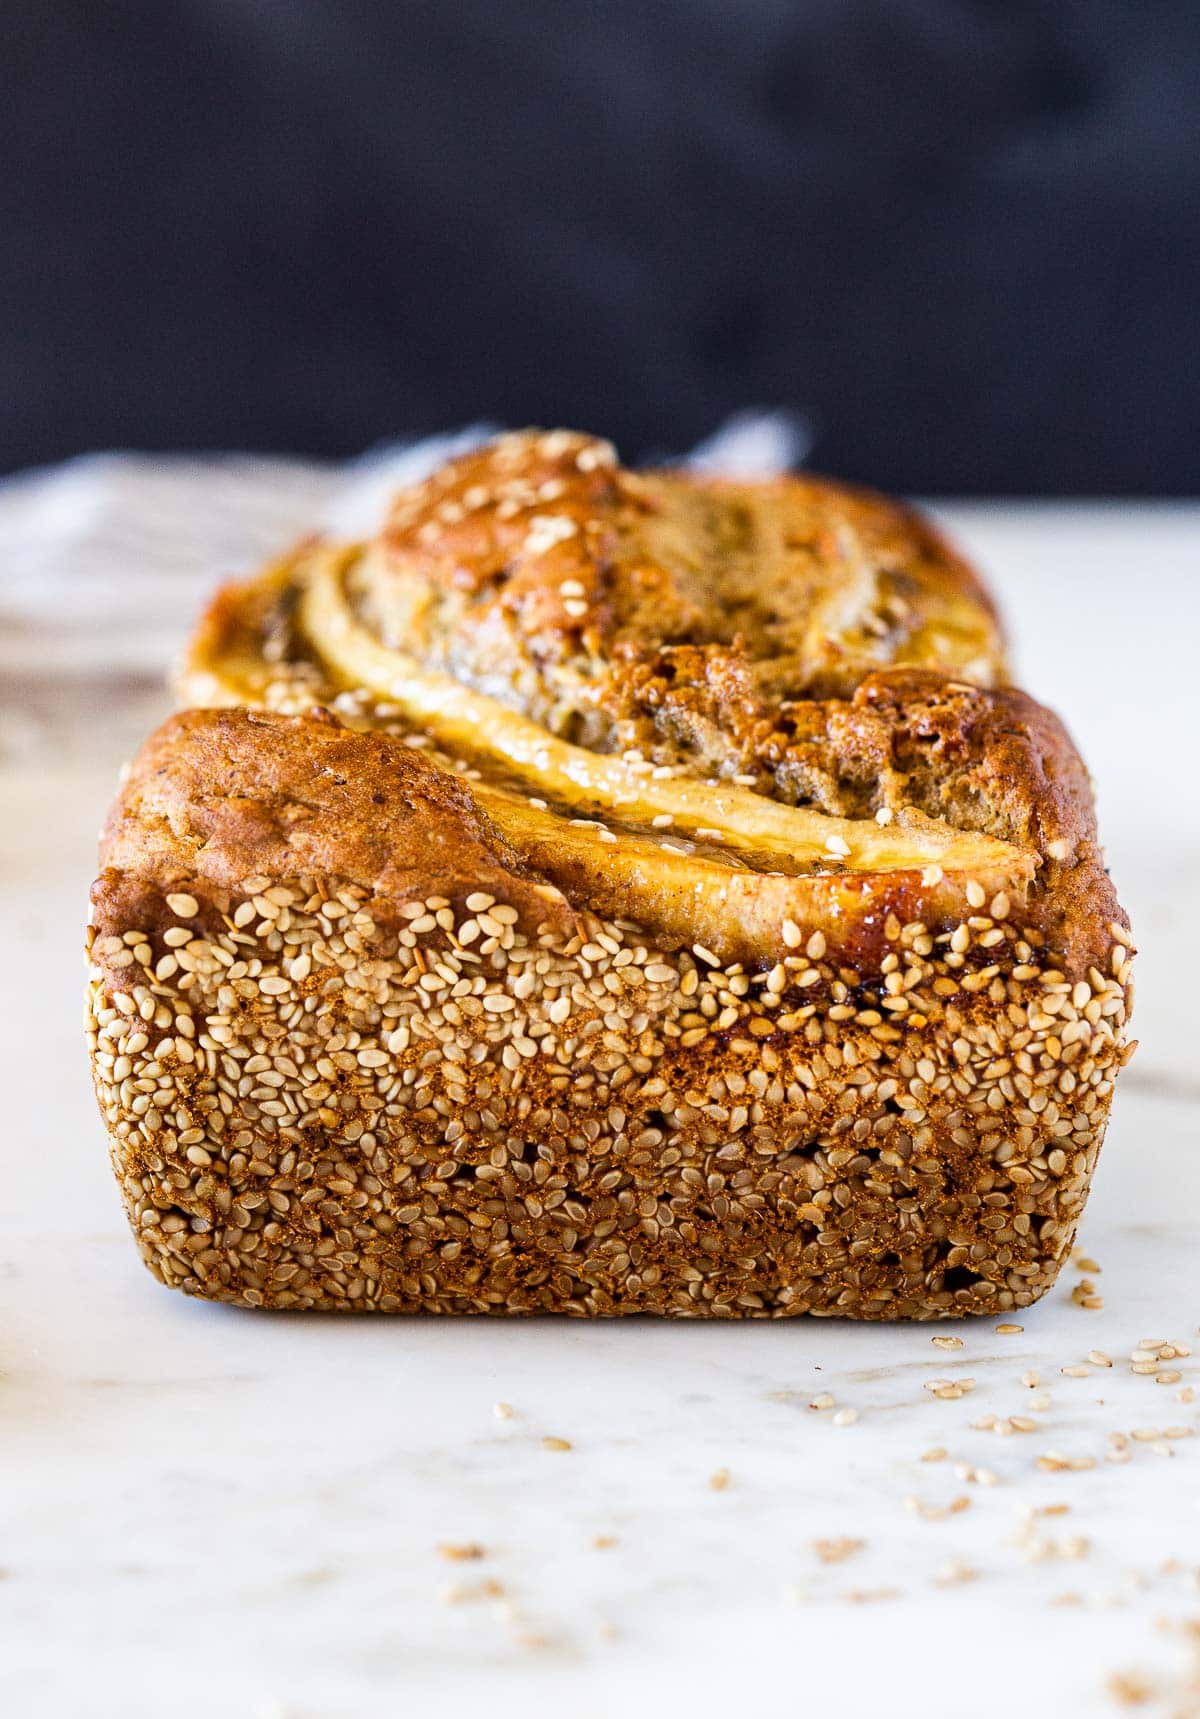 Here's a healthy, delicious recipe for Banana Bread with a toasty Sesame Seed Crust.  Infused with ginger, it's moist and flavorful. Vegan-adaptable, and can be made with sourdough starter.